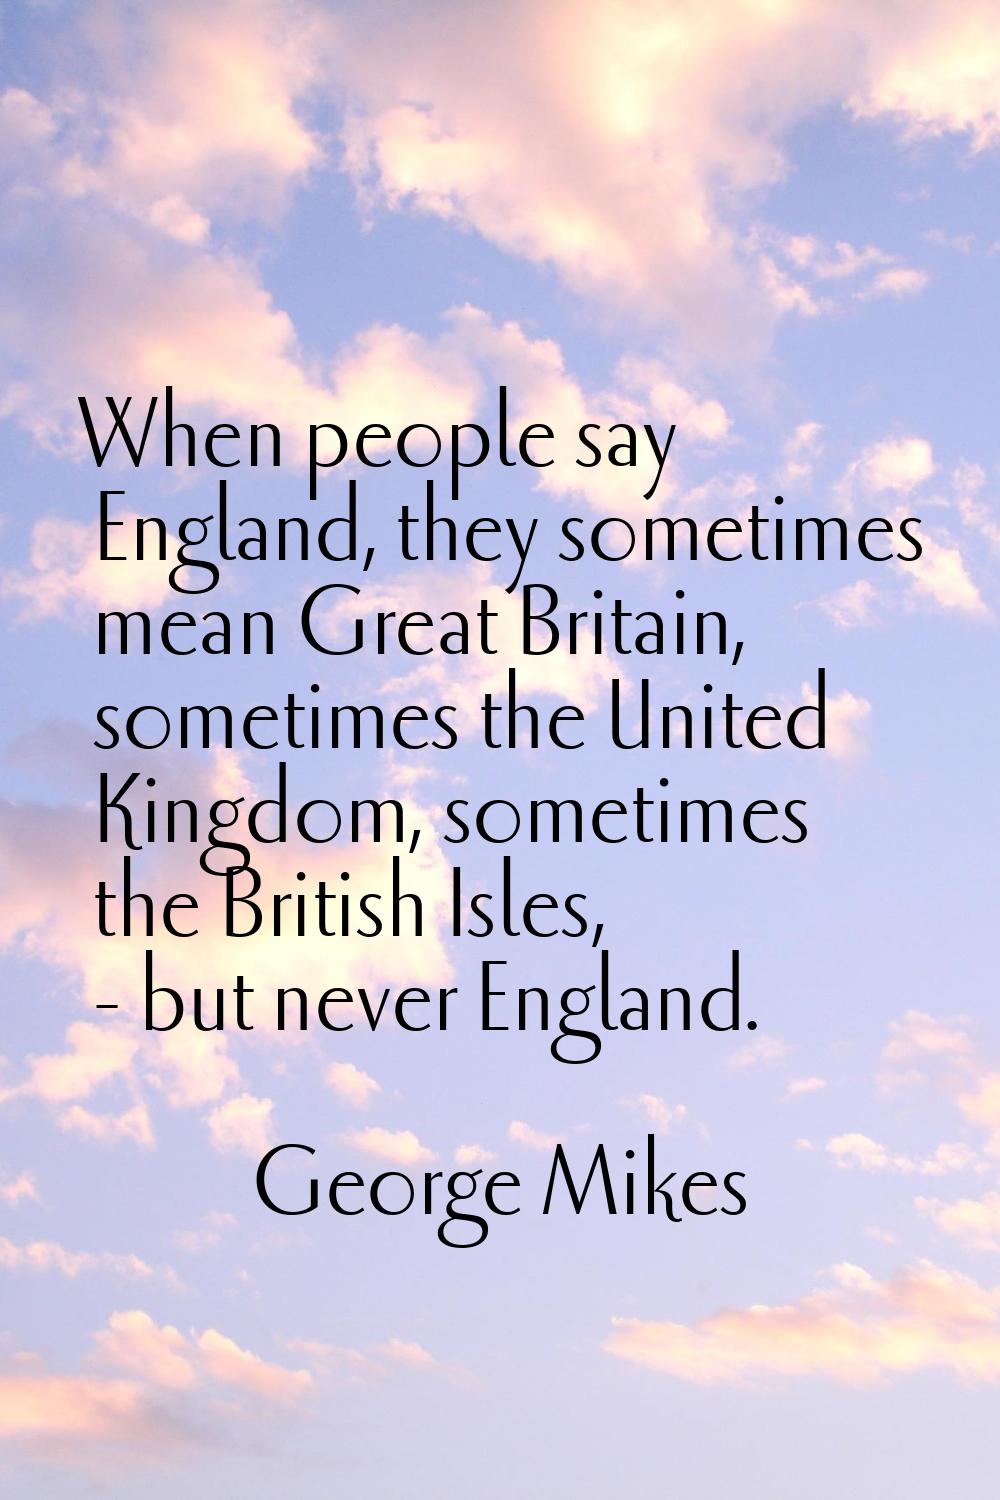 When people say England, they sometimes mean Great Britain, sometimes the United Kingdom, sometimes